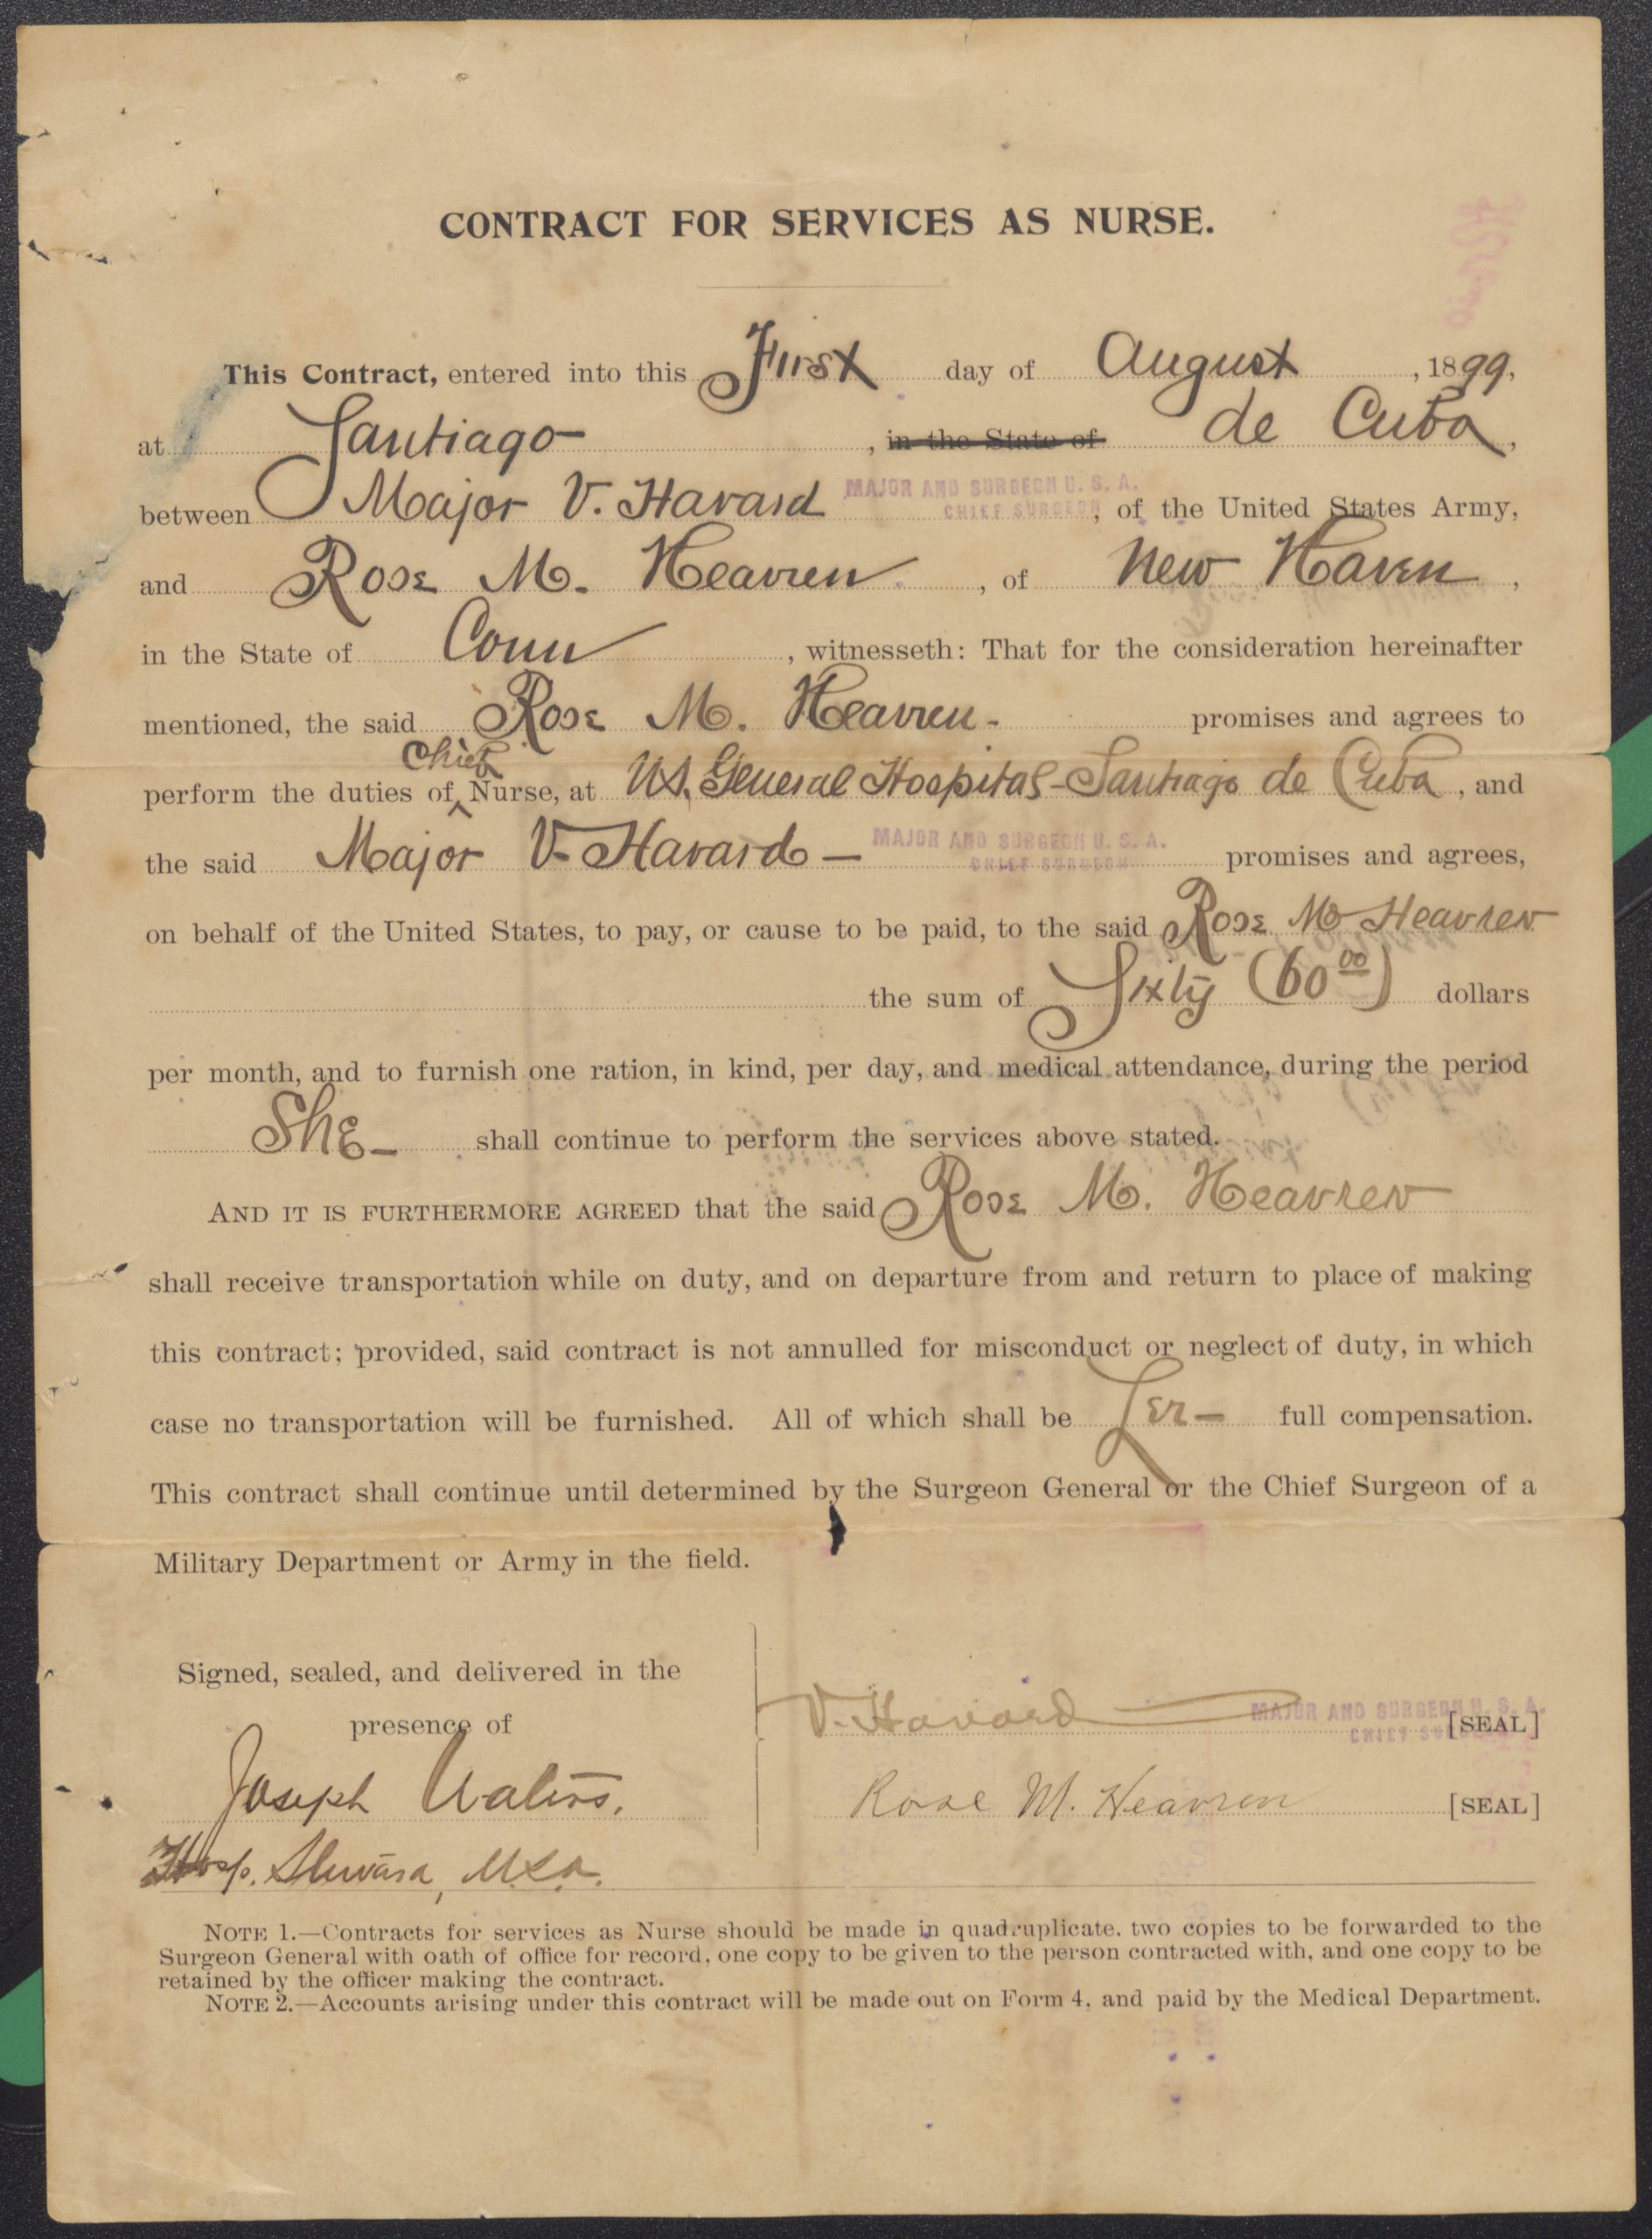 Contract For Services as Nurse, for Rose M. Heavren, agreeing to perform duties of Chief Nurse, US General Hospital, Santiago de Cuba, dated 1 August 1899.<br />
Rose M. Heavren Collection, Gift of Mary H. Budds, Military Women’s Memorial Collection